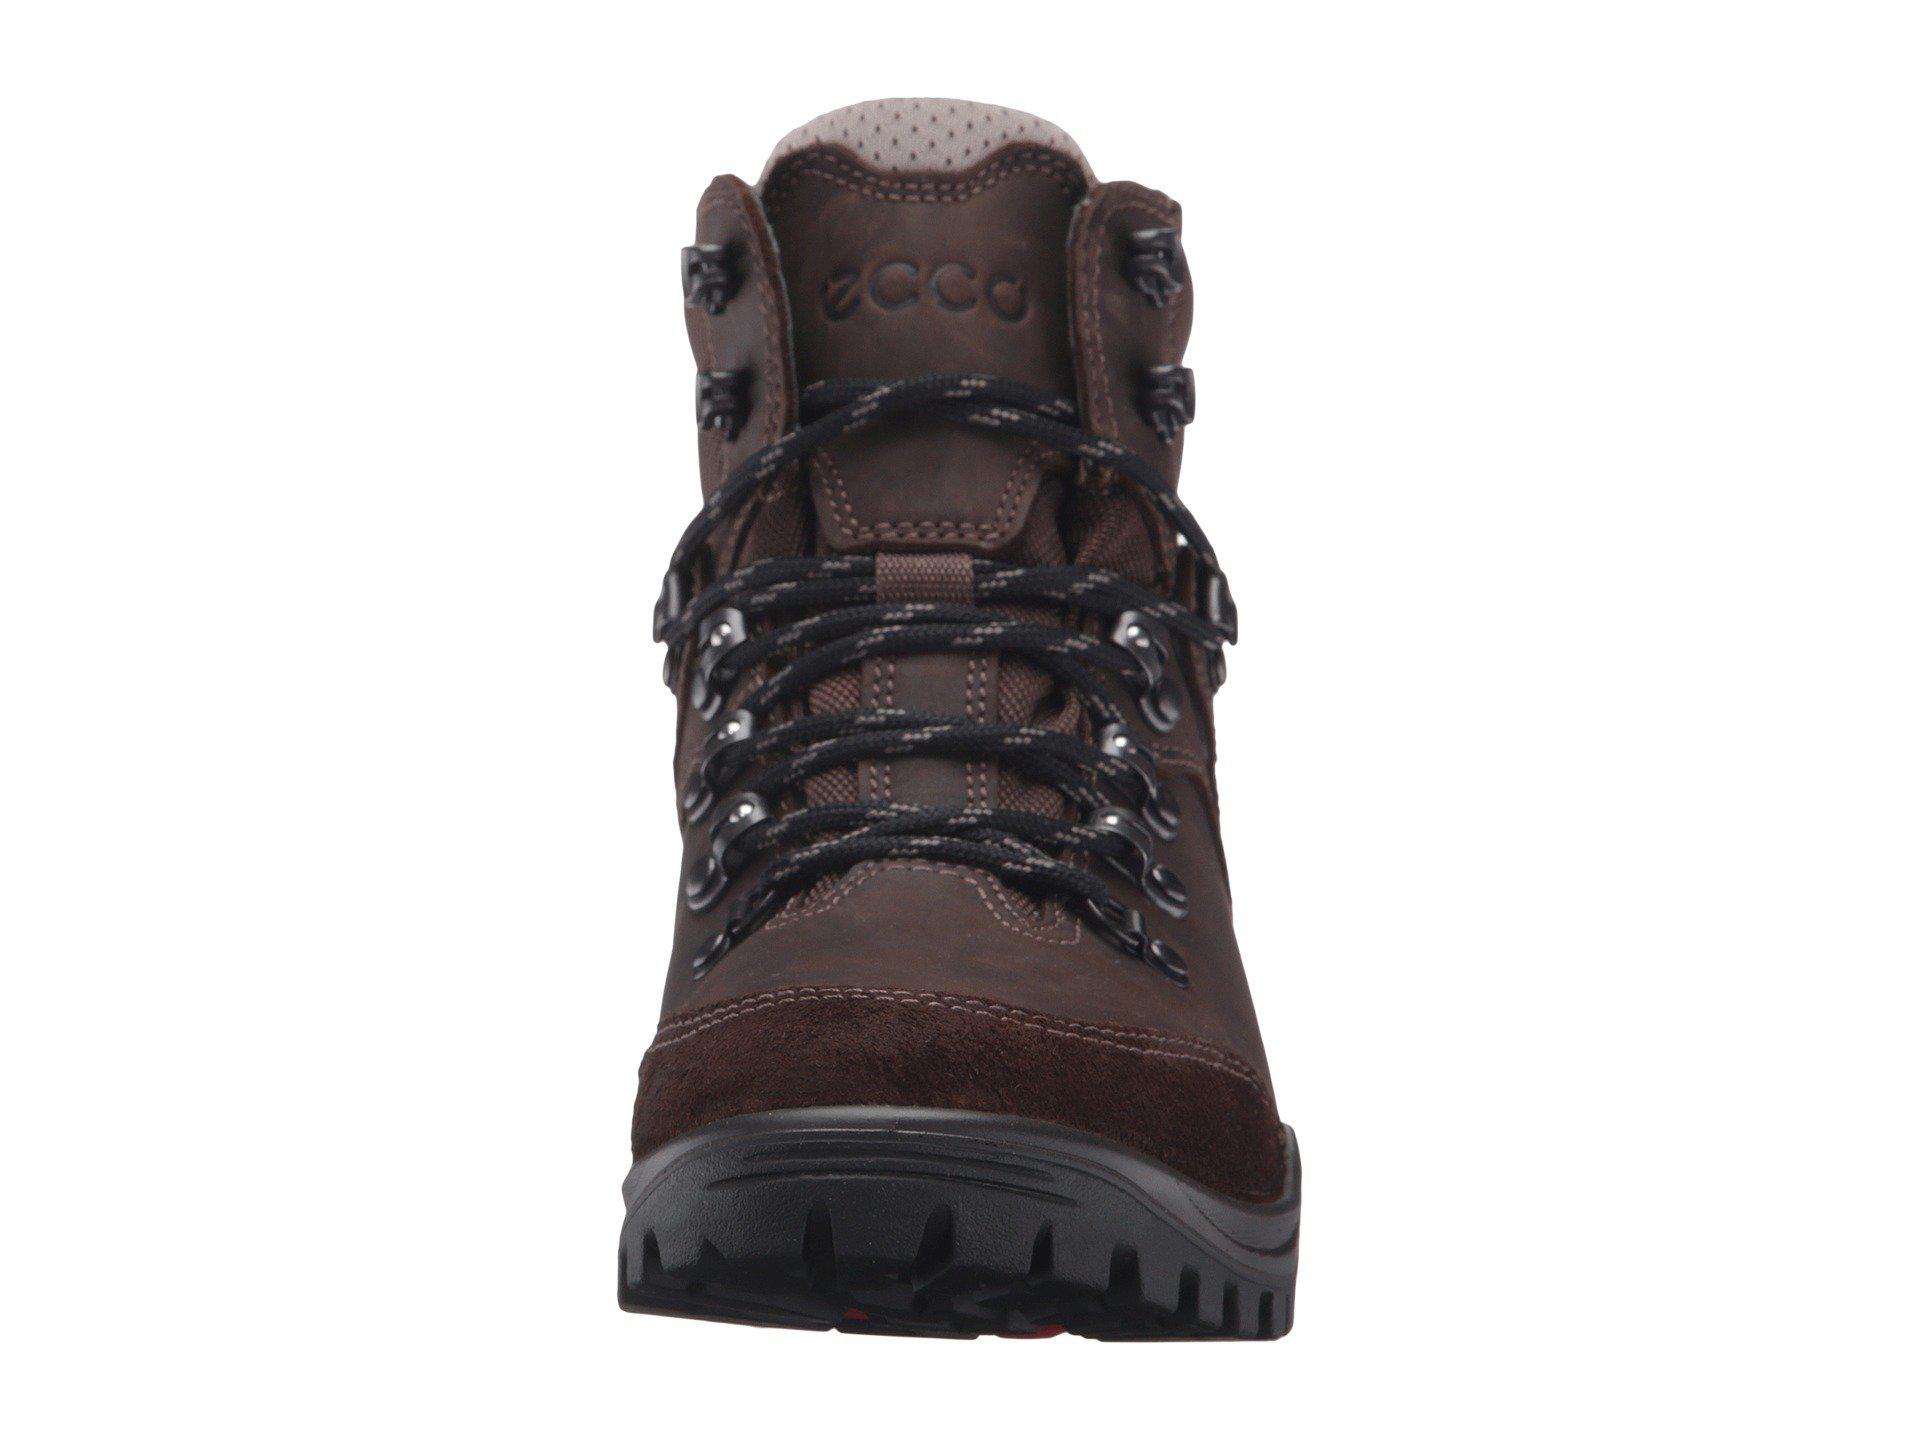 Ecco Leather Xpedition Iii Ladies Low Rise Hiking Shoes in Coffee (Brown) -  Lyst